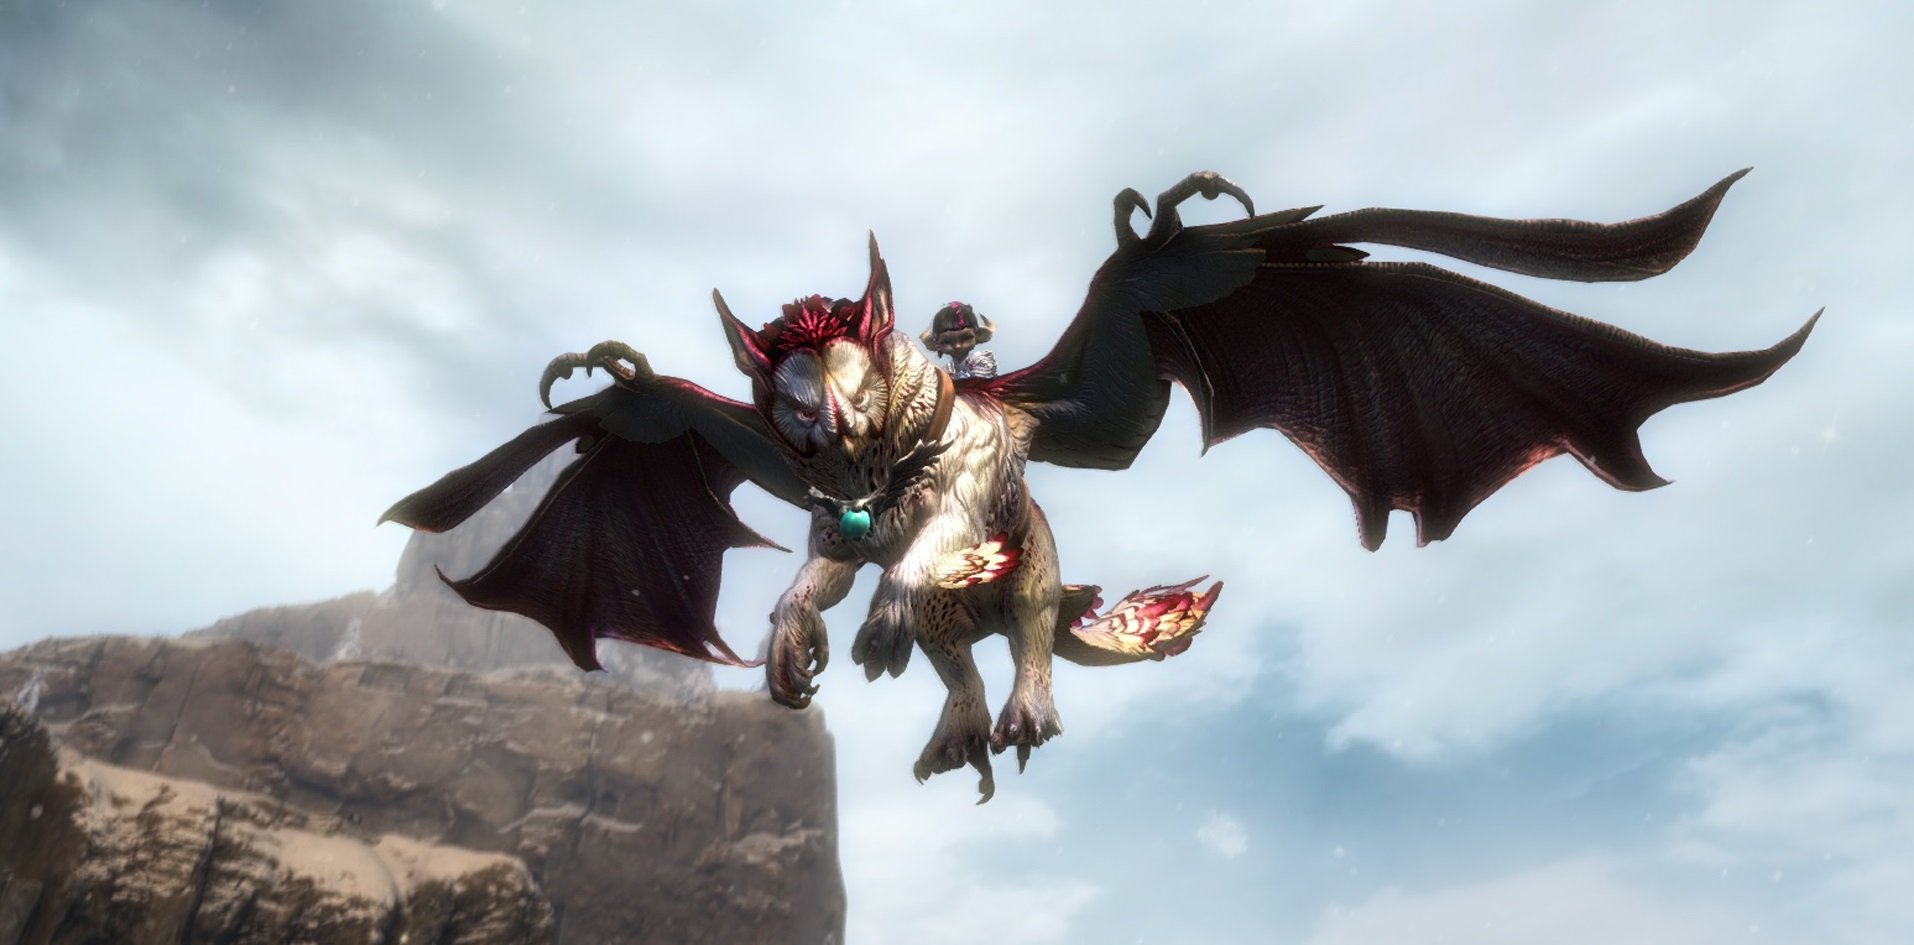 guild wars 2 path of fire mounts image